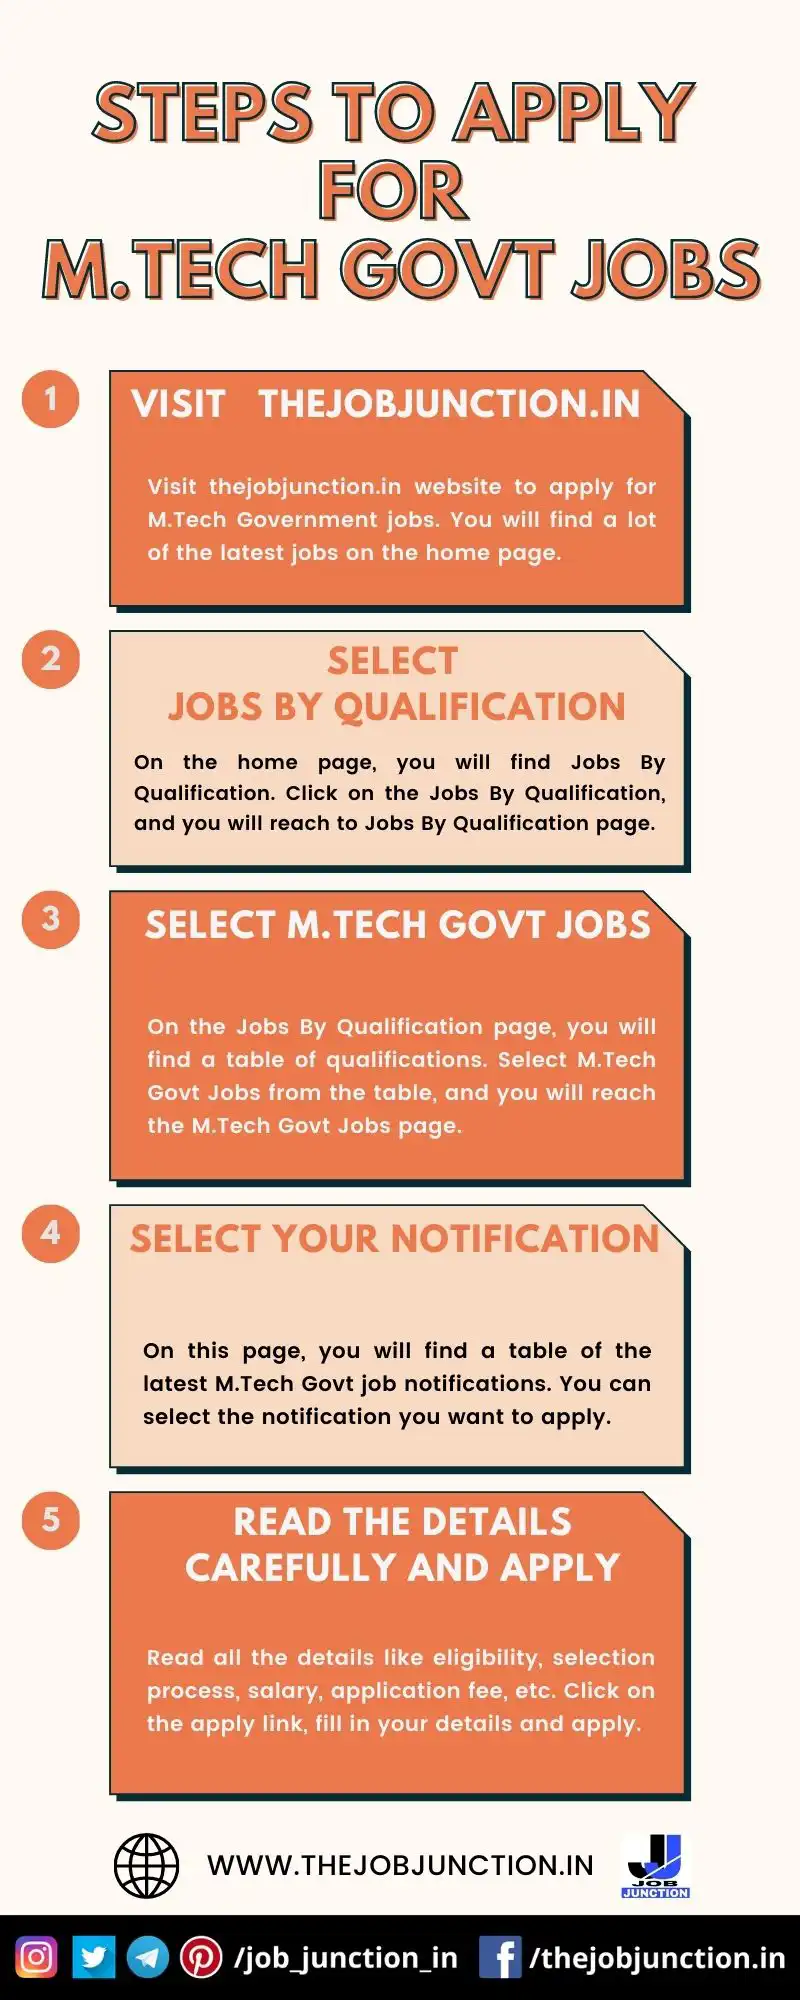 STEPS TO APPLY FOR M.TECH GOVT JOBS